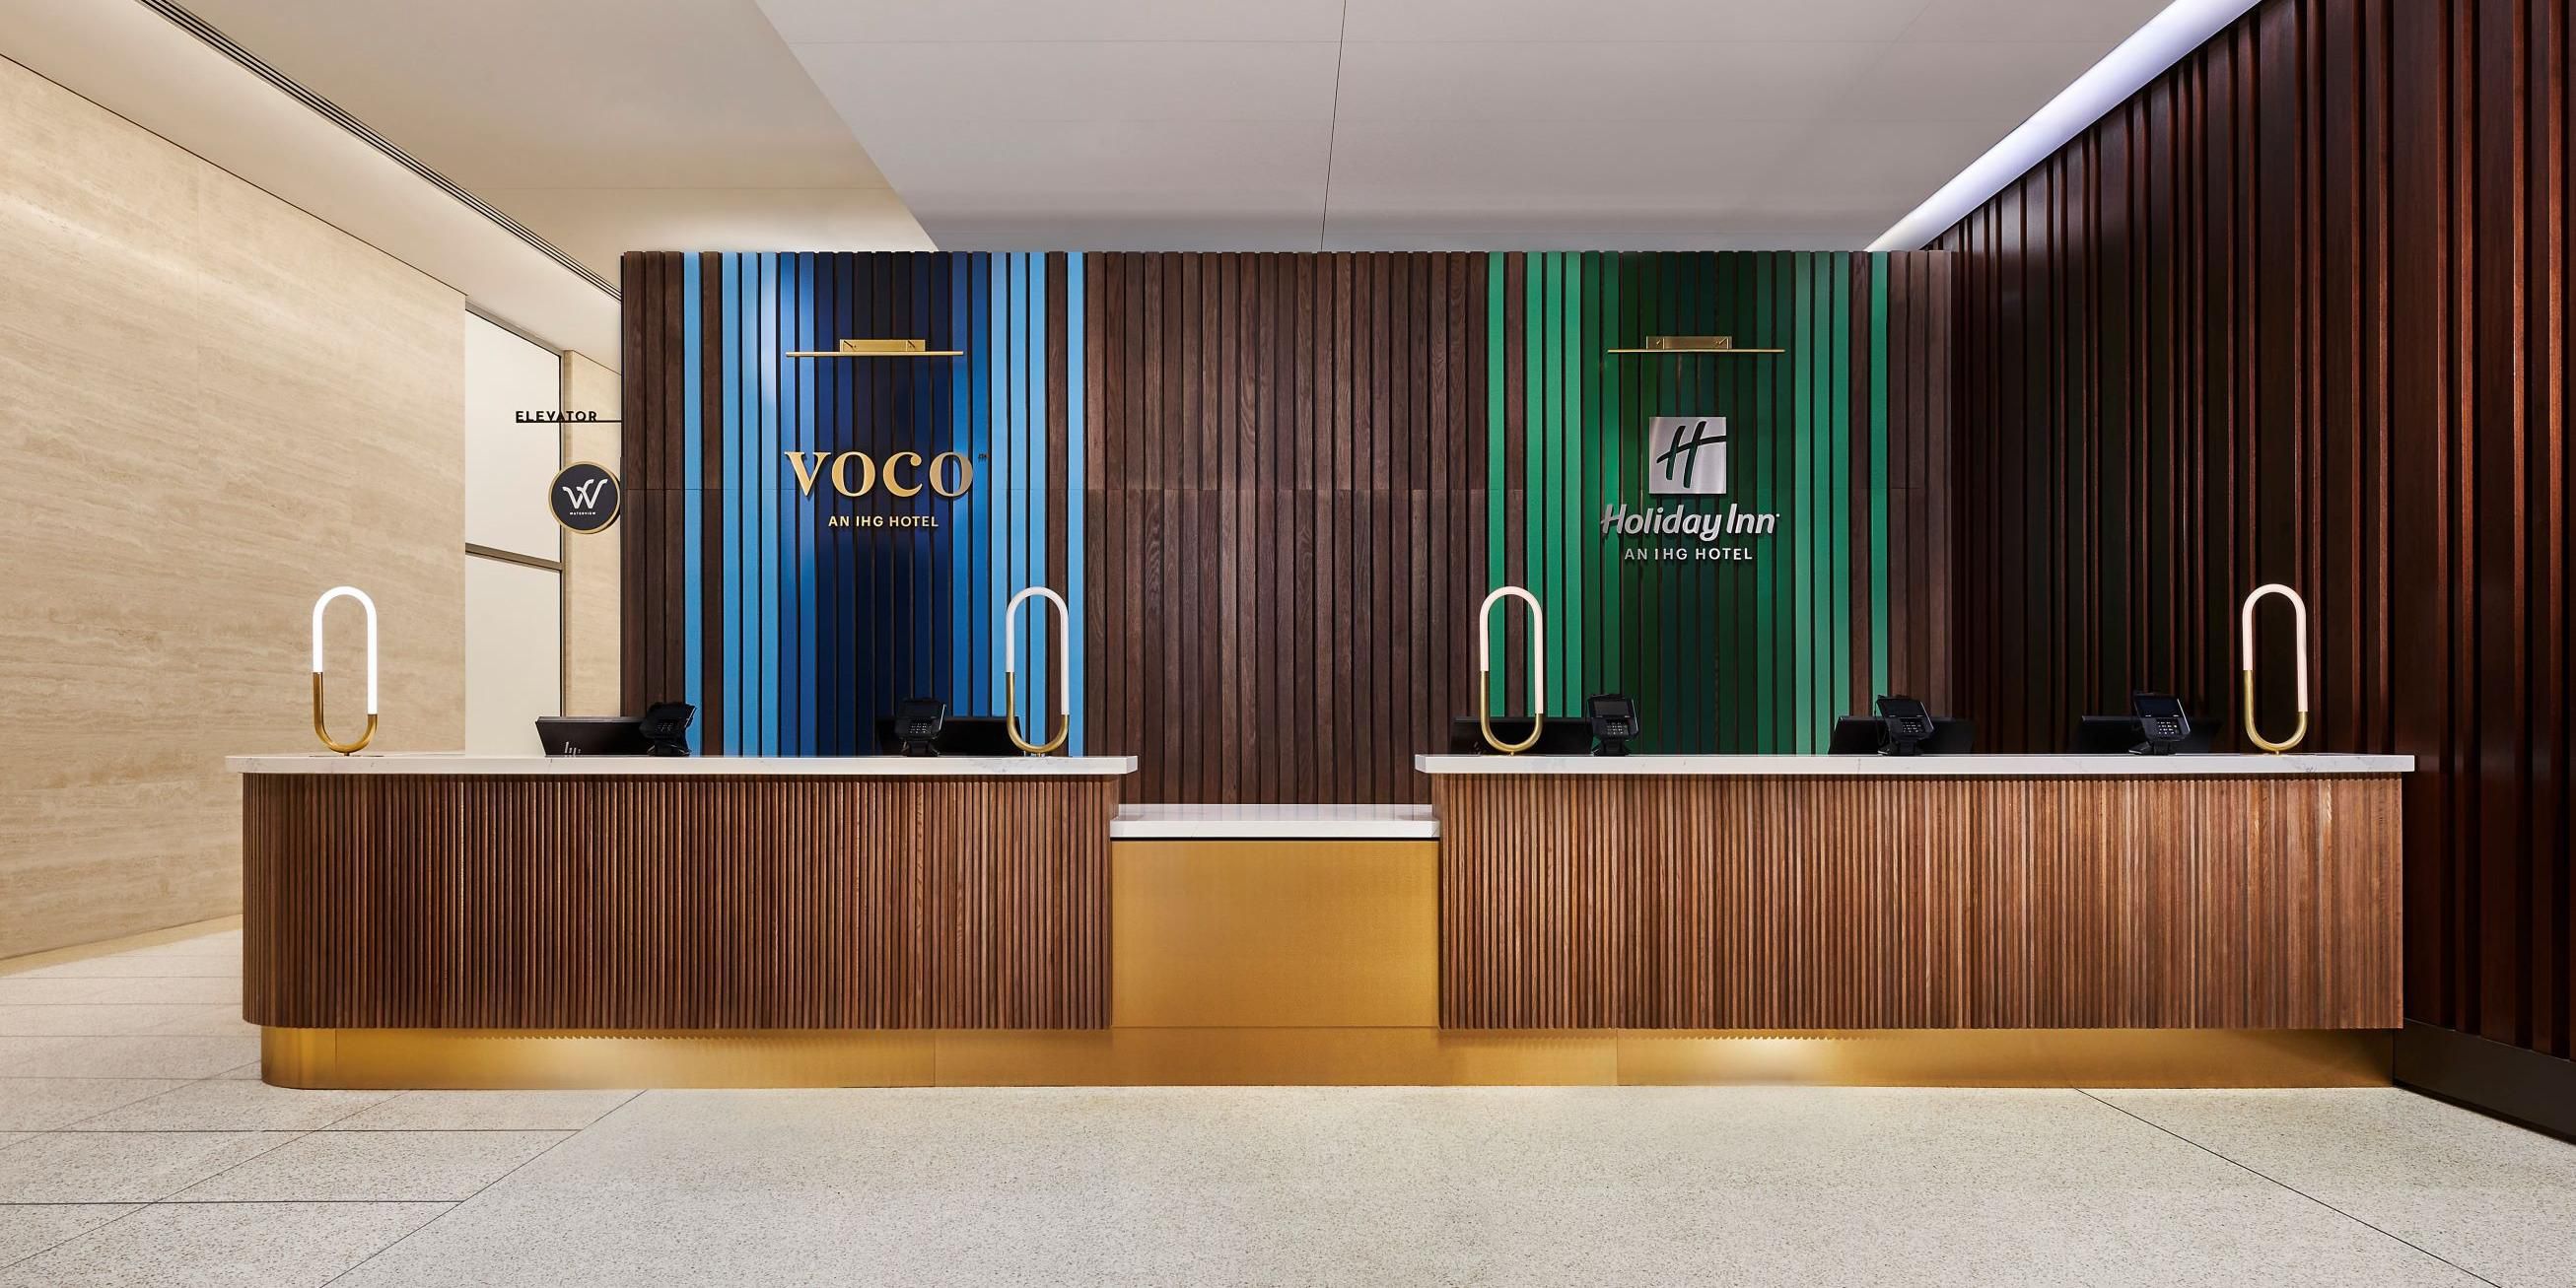 voco Chicago Downtown and Holiday Inn Wolf Point check-in desks are next to each other in a shared space